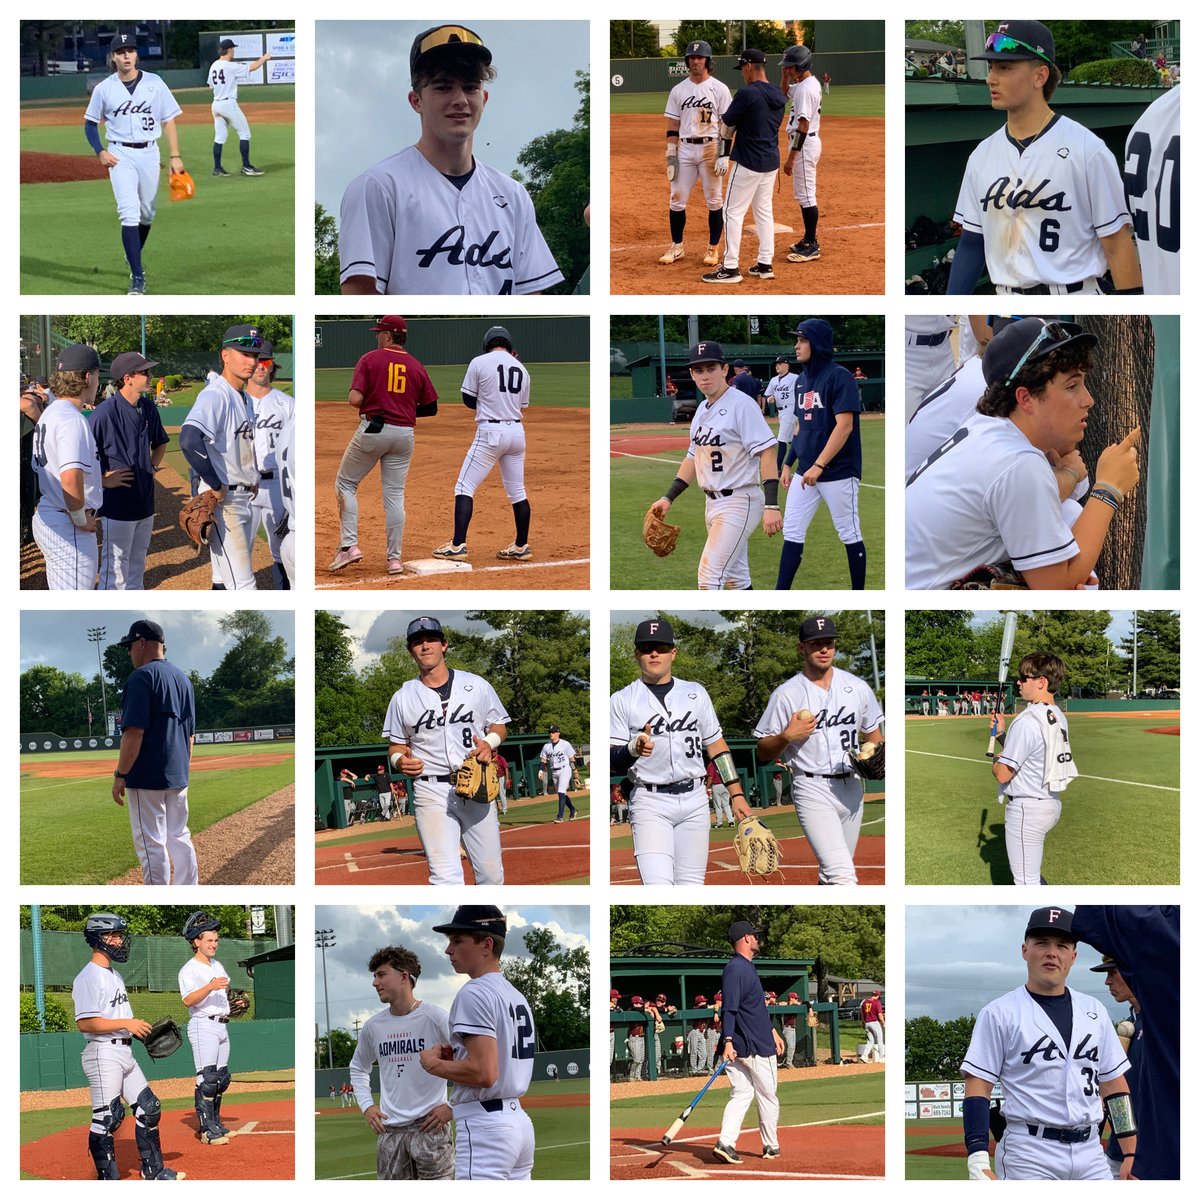 ⚾️ CLASS 4A BASEBALL SECTIONALS ⚓️ GAME DAY 🎩 Science Hill Hilltoppers (32-12) at Farragut Admirals (35-5) Game 2 of the Series is Today at 4:00 ⚾️ Tickets are $10 Farragut leads the Series 1-0 Game 3 (If Necessary) would be approximately 30 minutes following Game 2